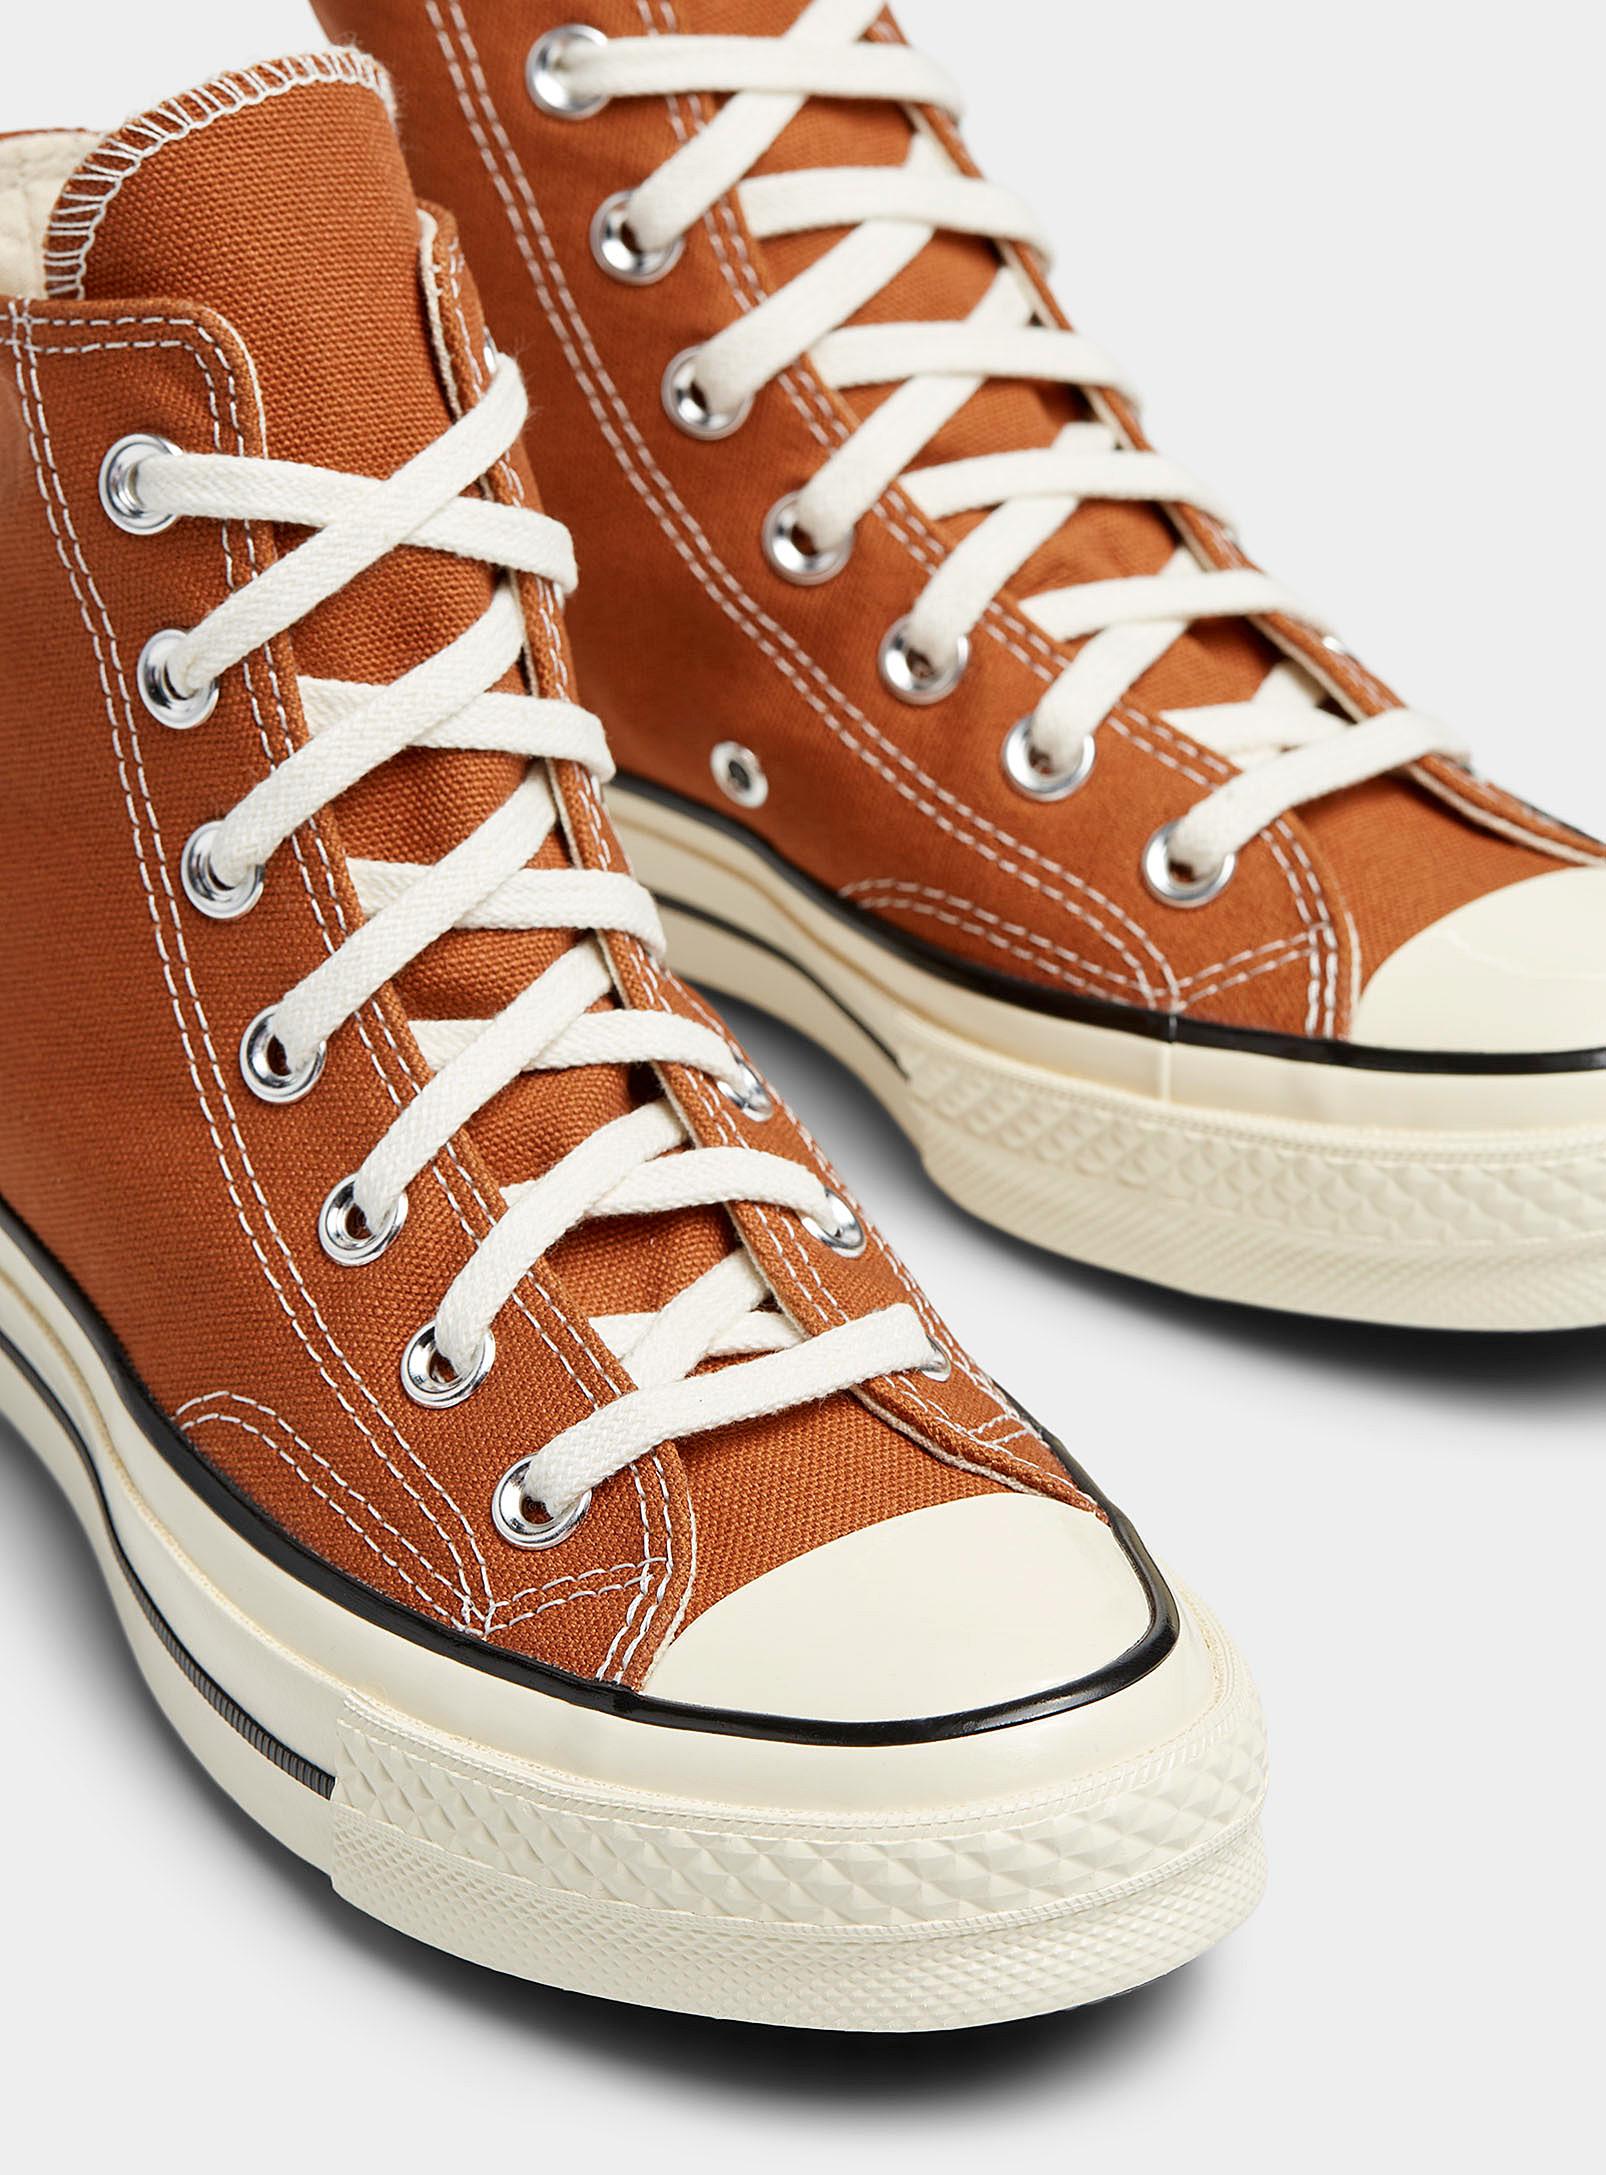 Converse Tawny Owl Chuck 70 High Top Sneakers Women in Brown | Lyst